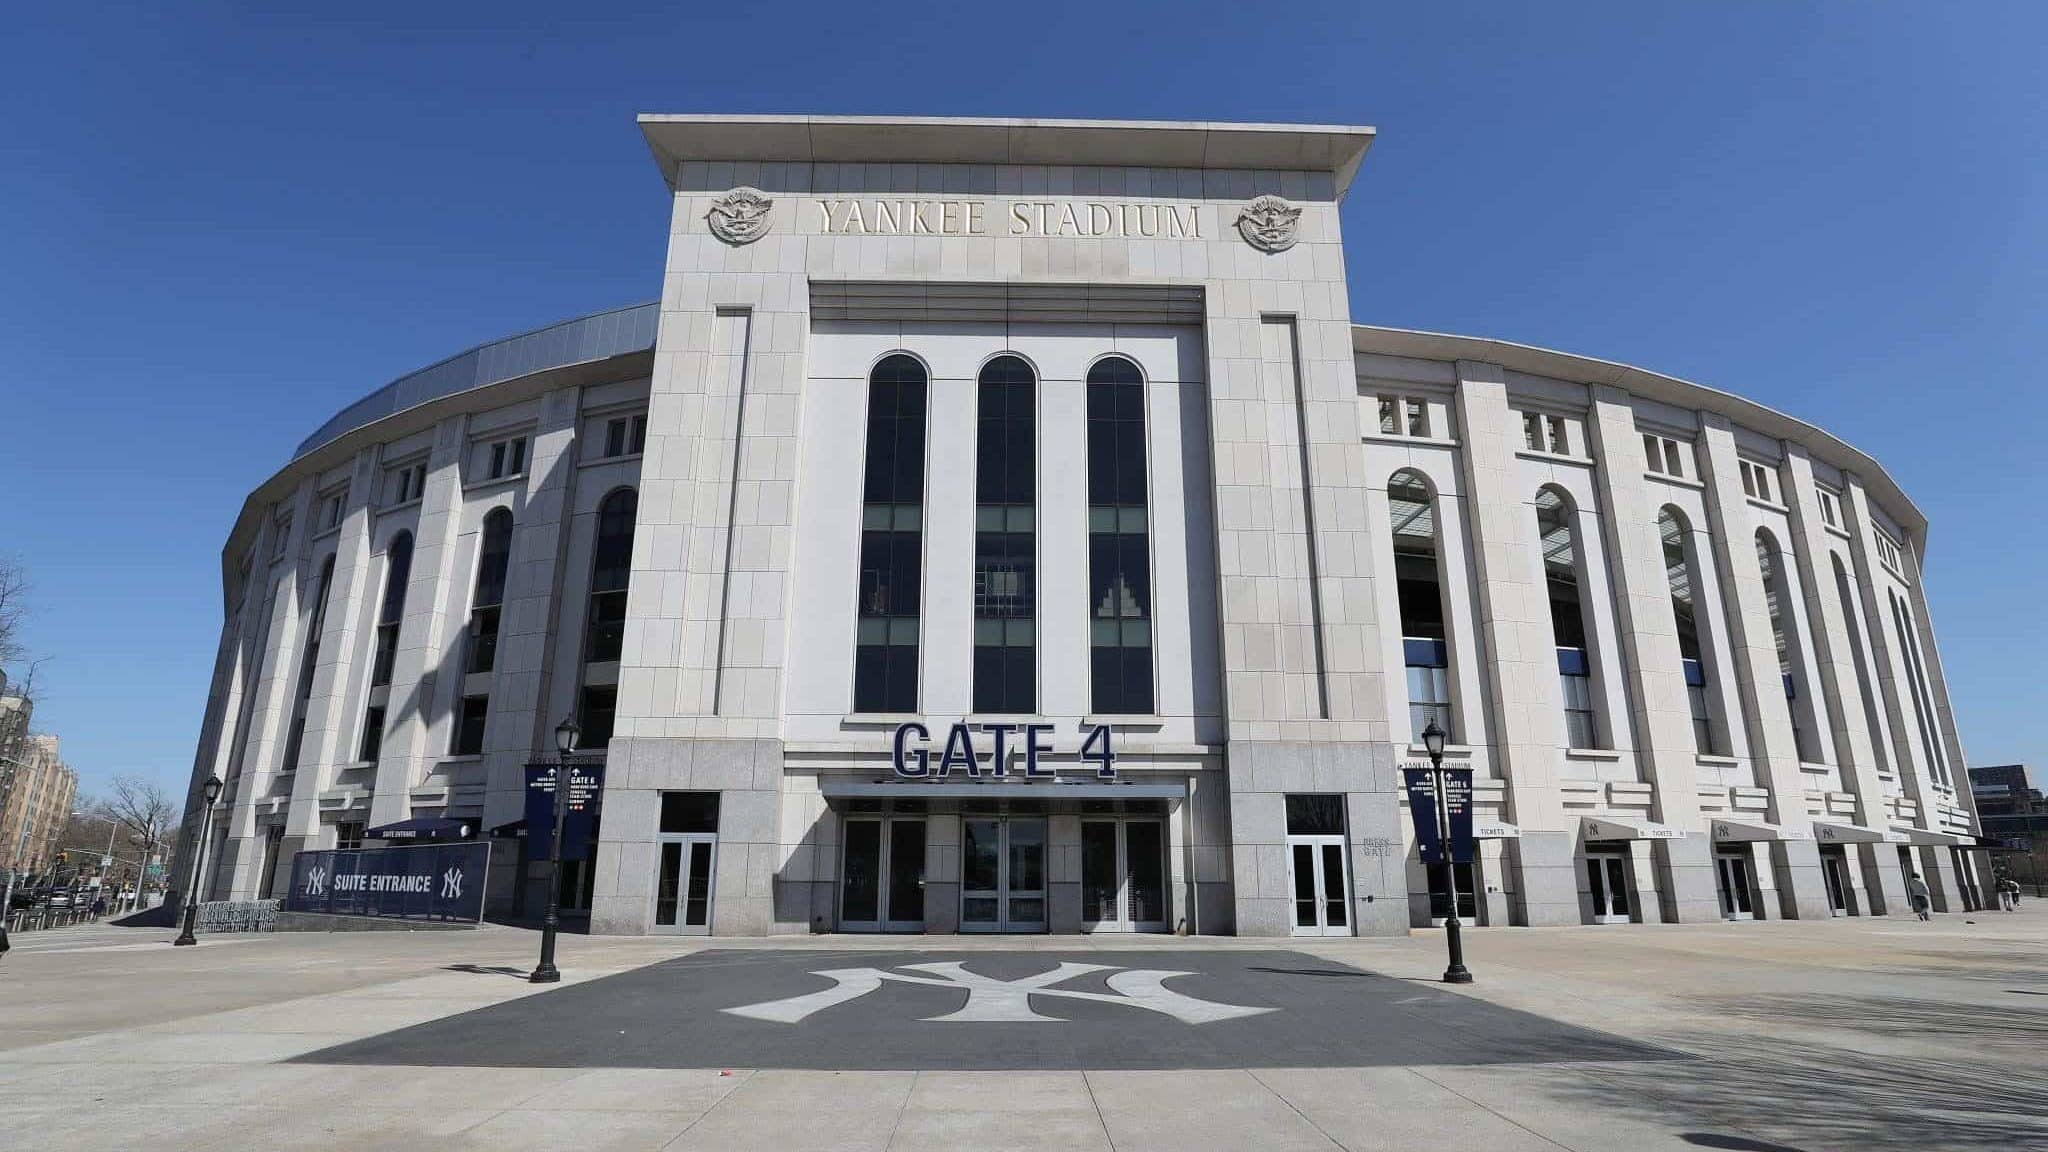 BRONX, NEW YORK - MARCH 26: Yankee Stadium is empty on the scheduled date for Opening Day March 26, 2020 in the Bronx, New York. Major League Baseball has postponed the start of its season due to the coronavirus (COVID-19) outbreak and MLB commissioner Rob Manfred recently said the league is 